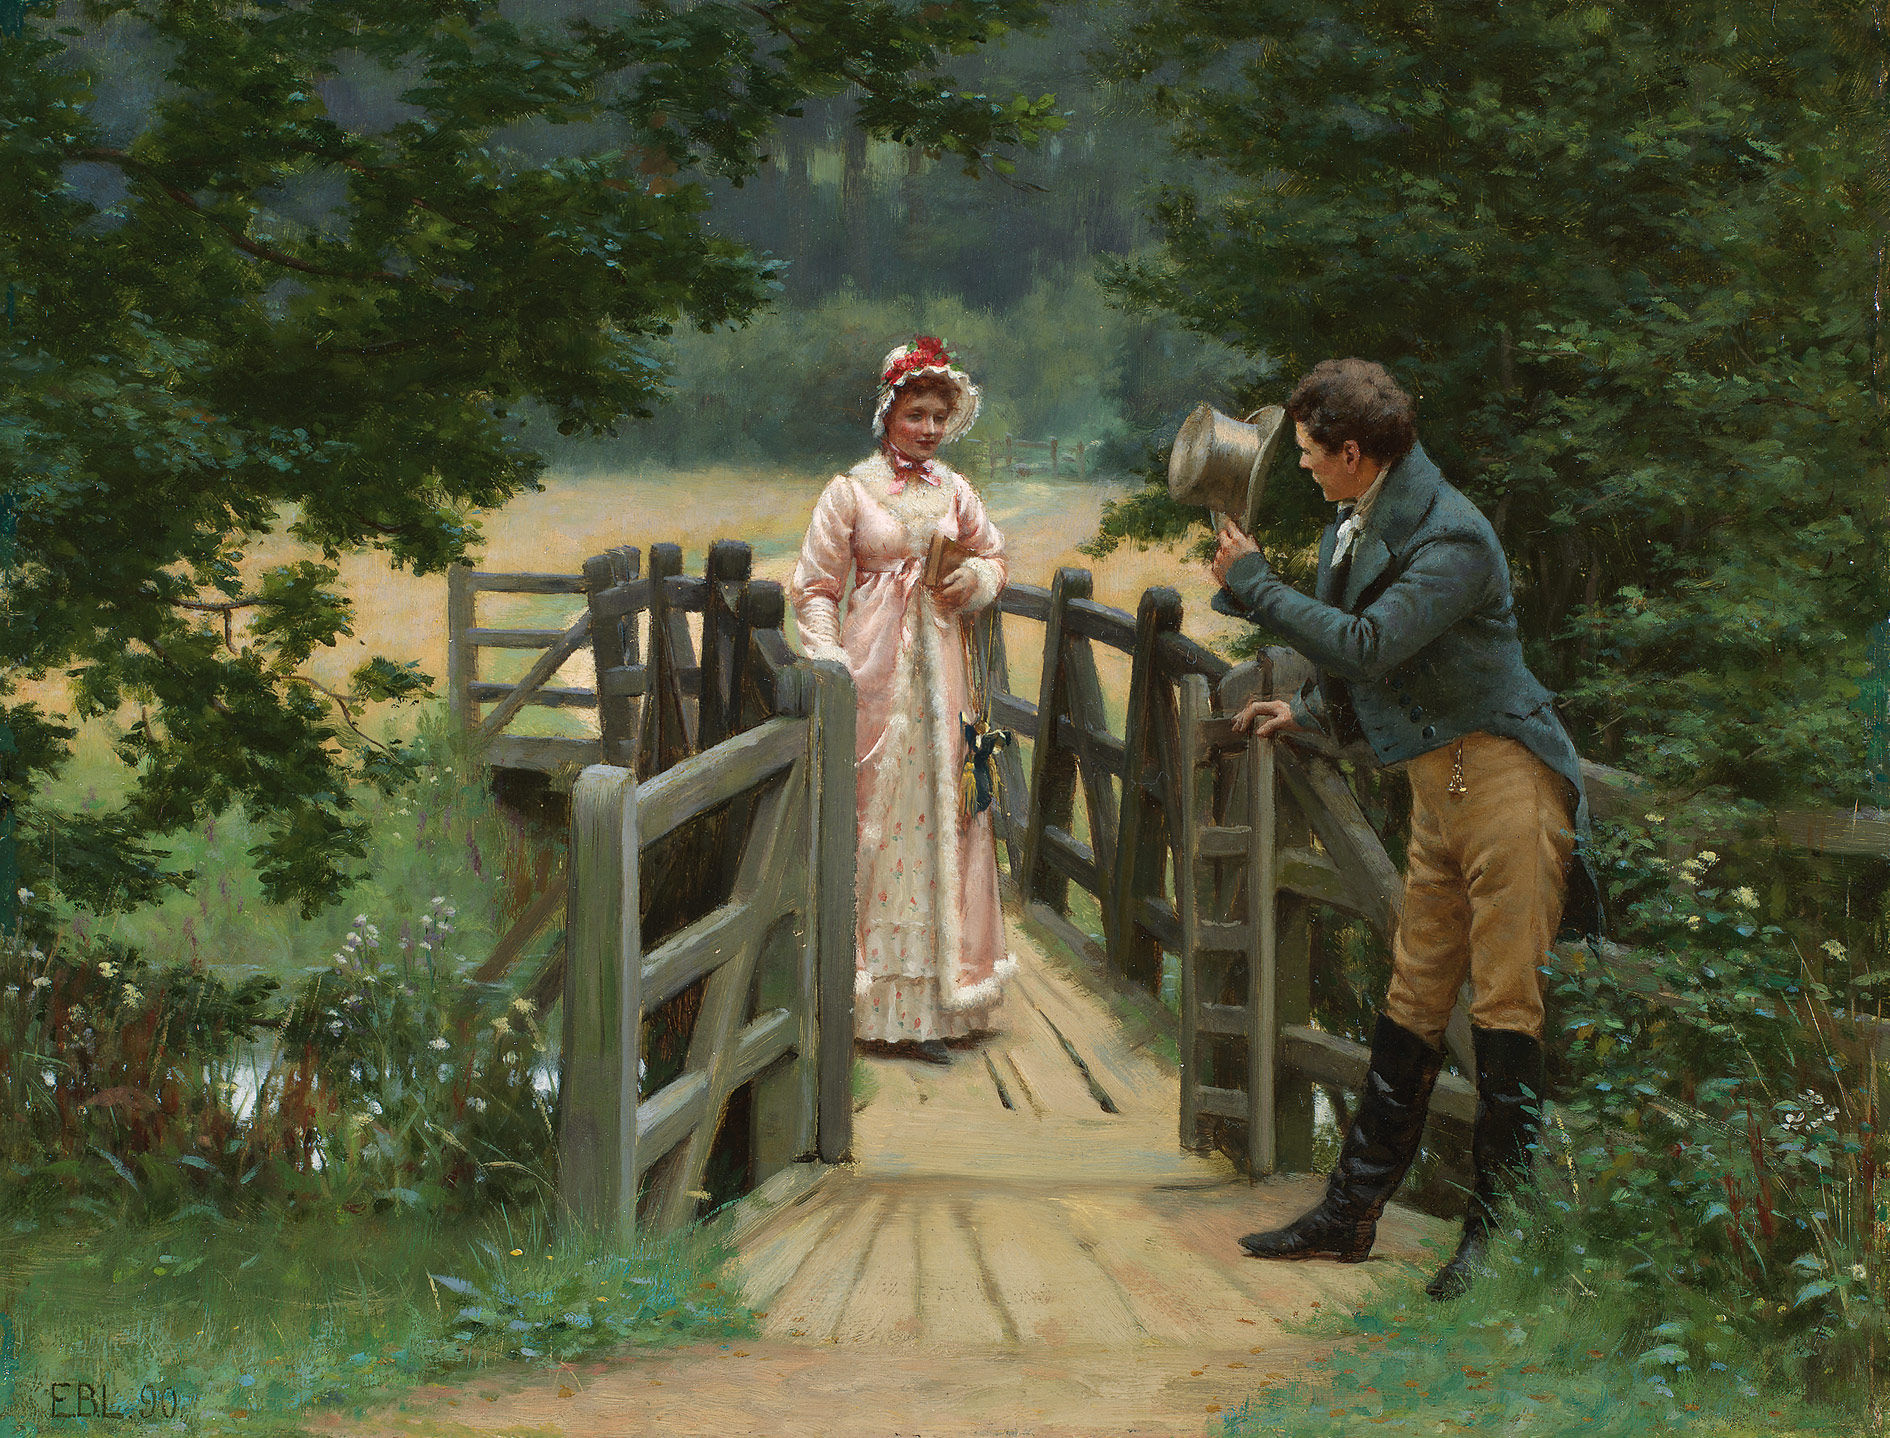 The Gallant Suitor by Edmund Blair Leighton